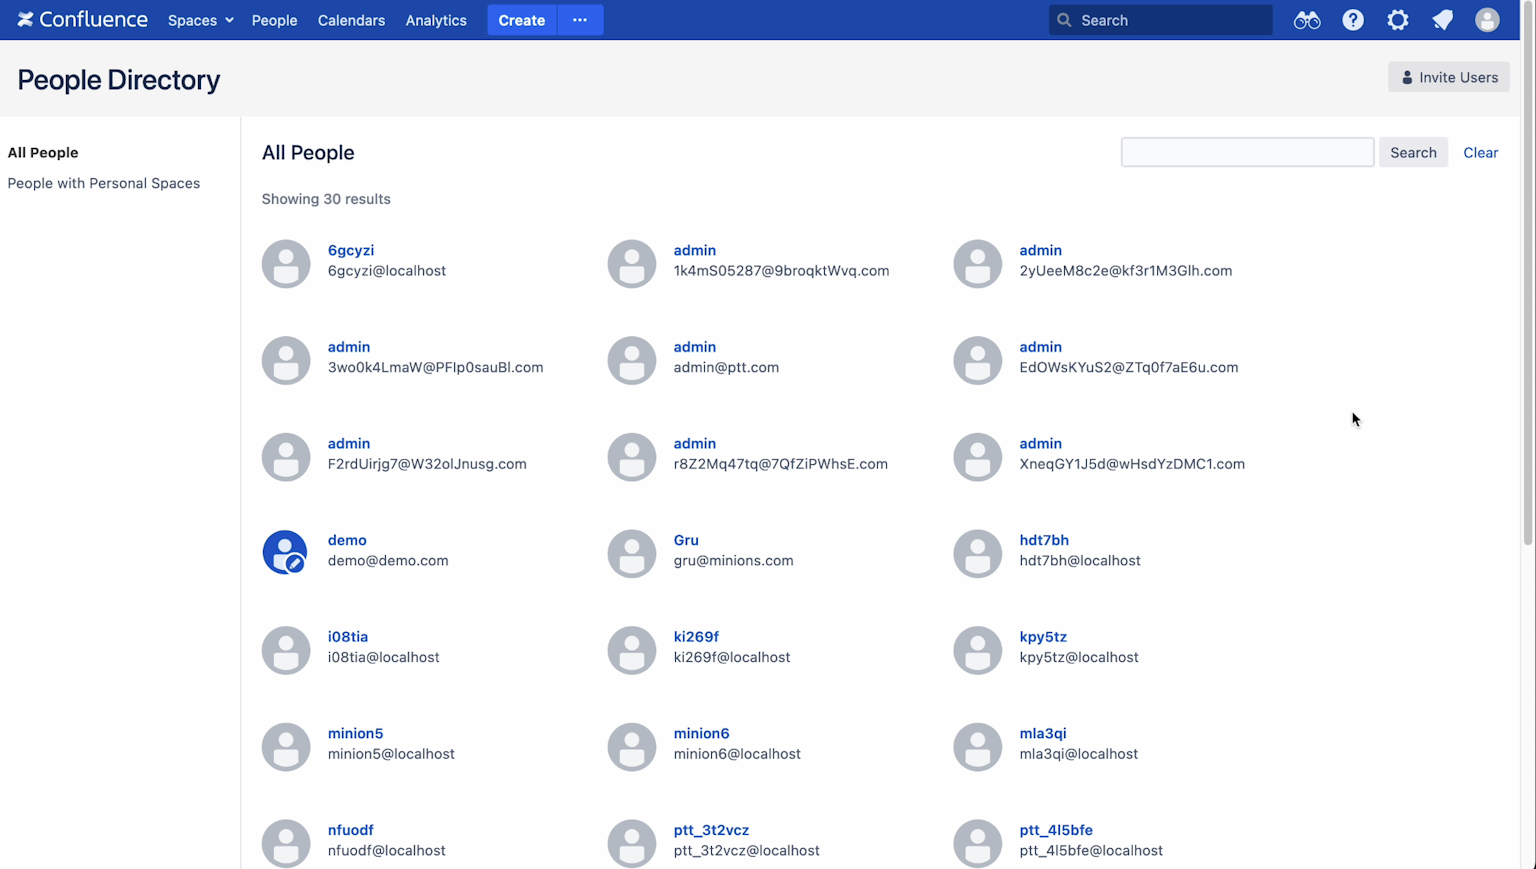 people directory in Confluence